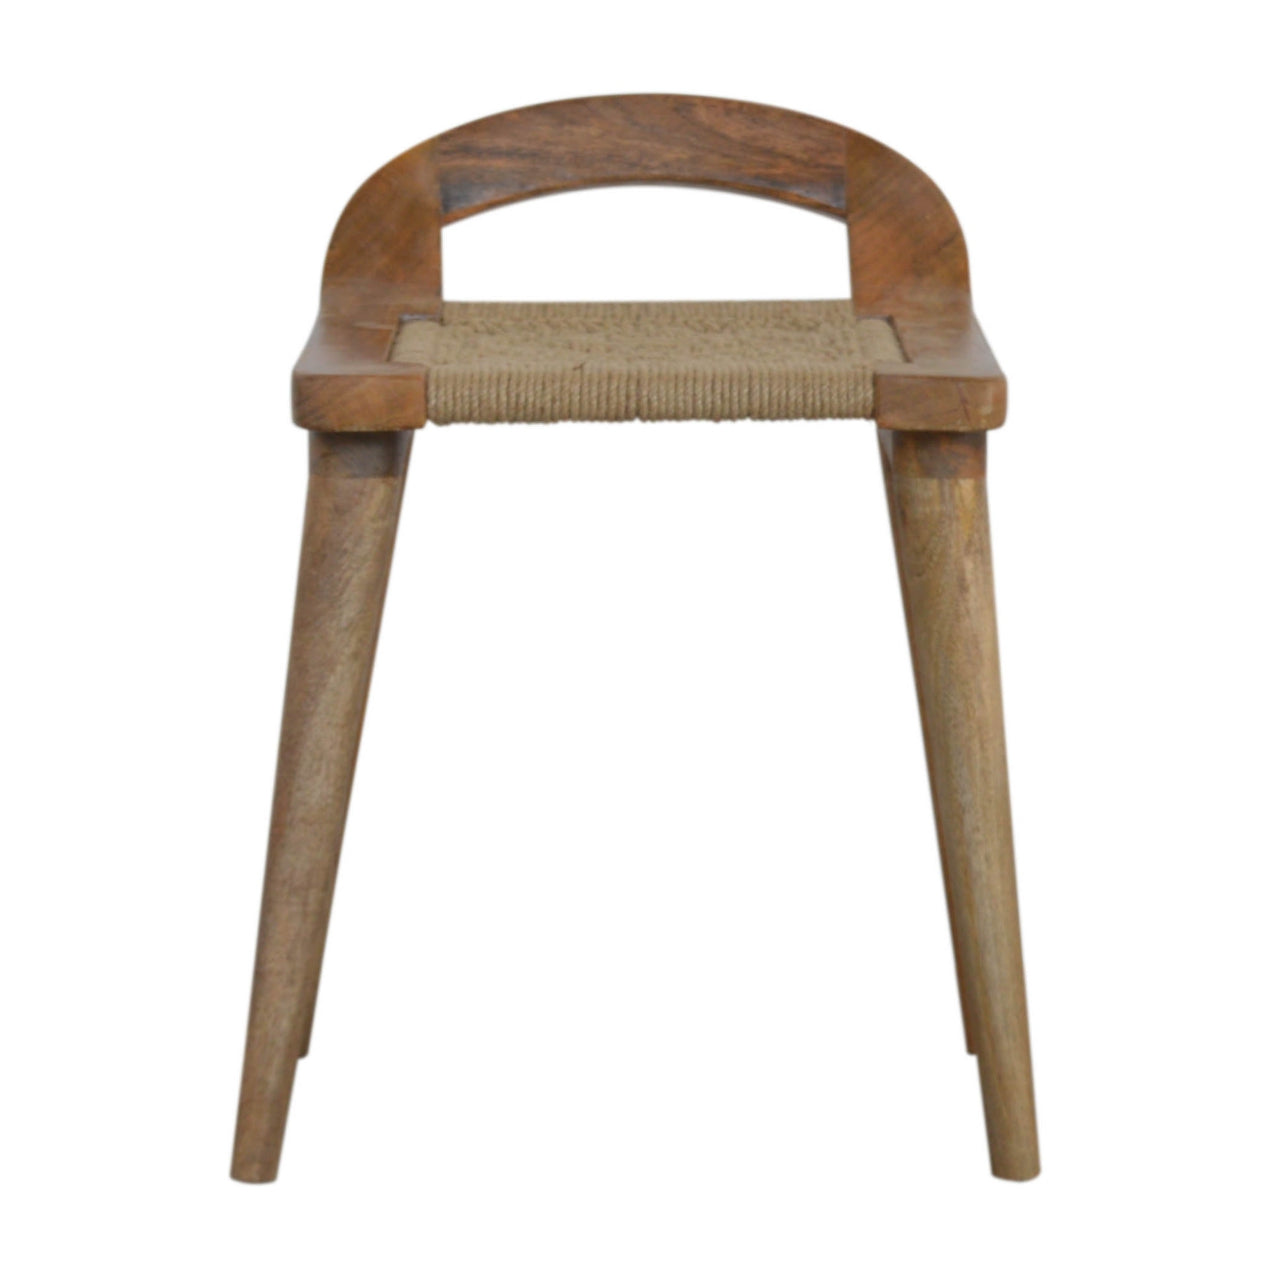 View Woven Raised Back Stool information